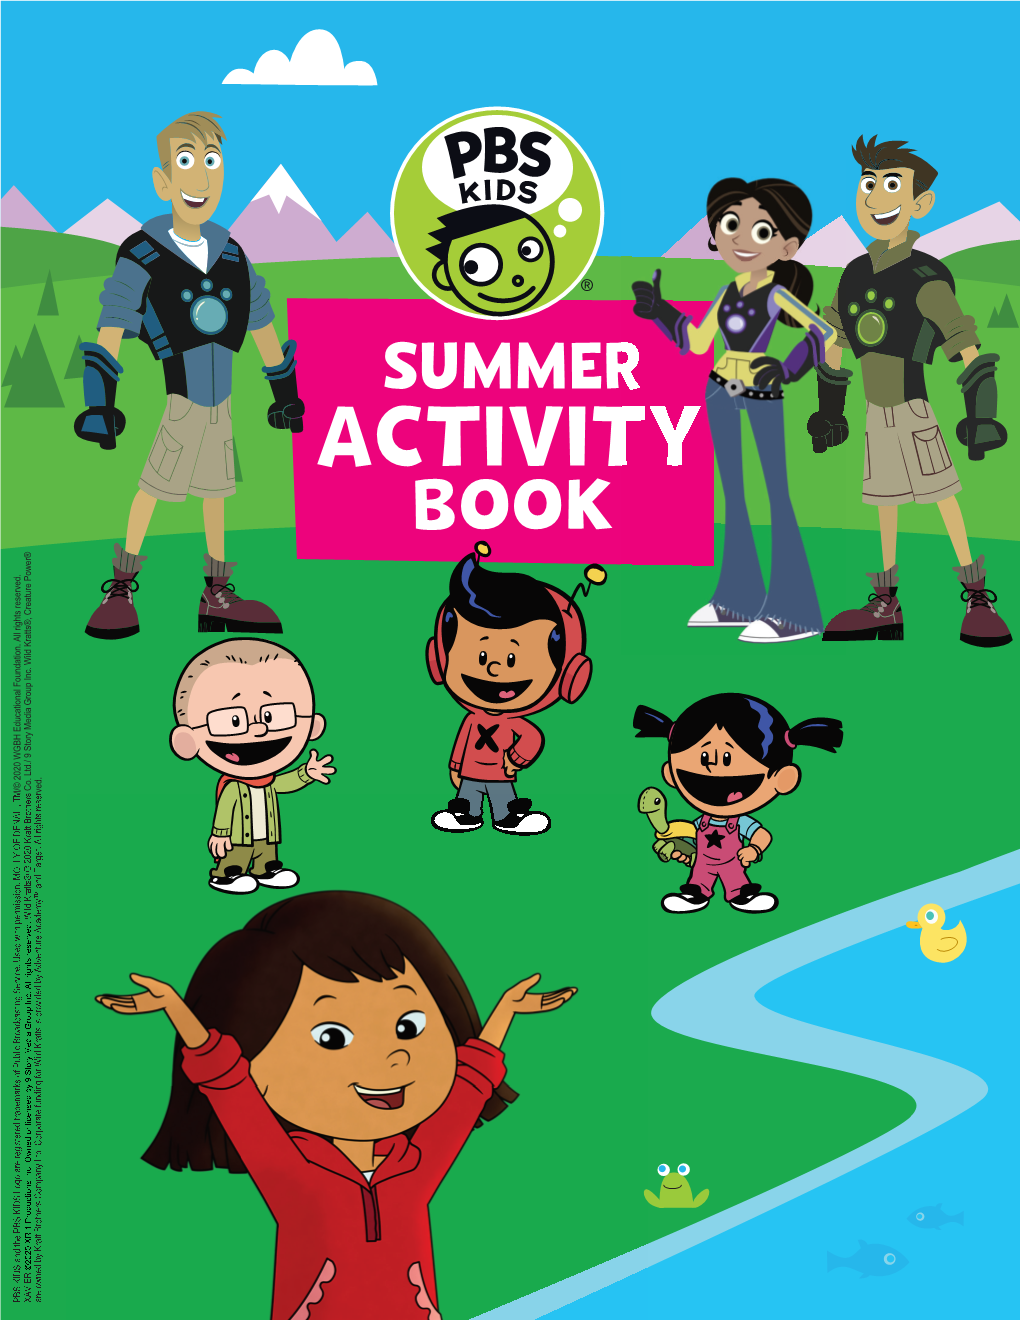 ACTIVITY BOOK TM/© 2020 WGBH Educational Foundation